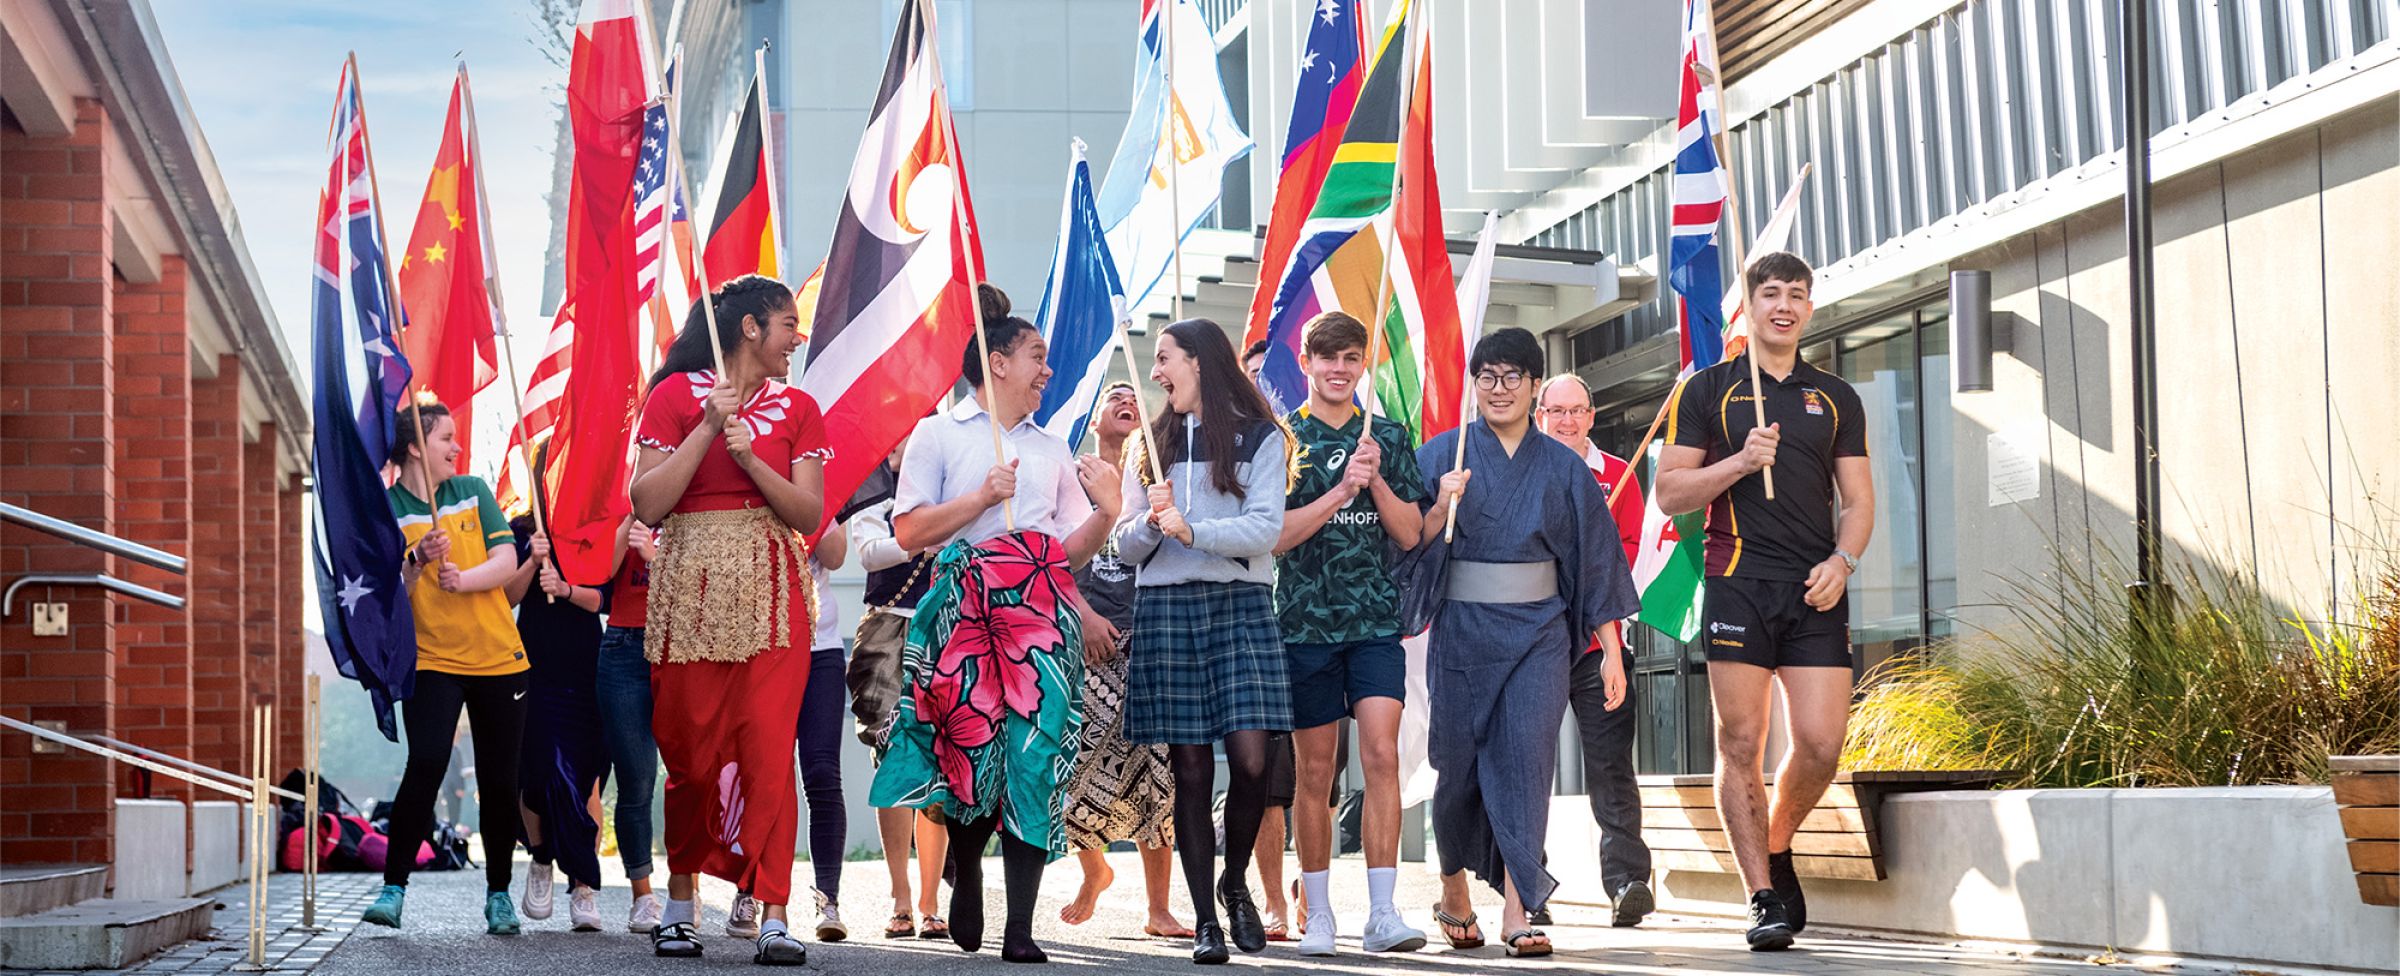 St Andrew's College international students in national dress with flags walking through the campus